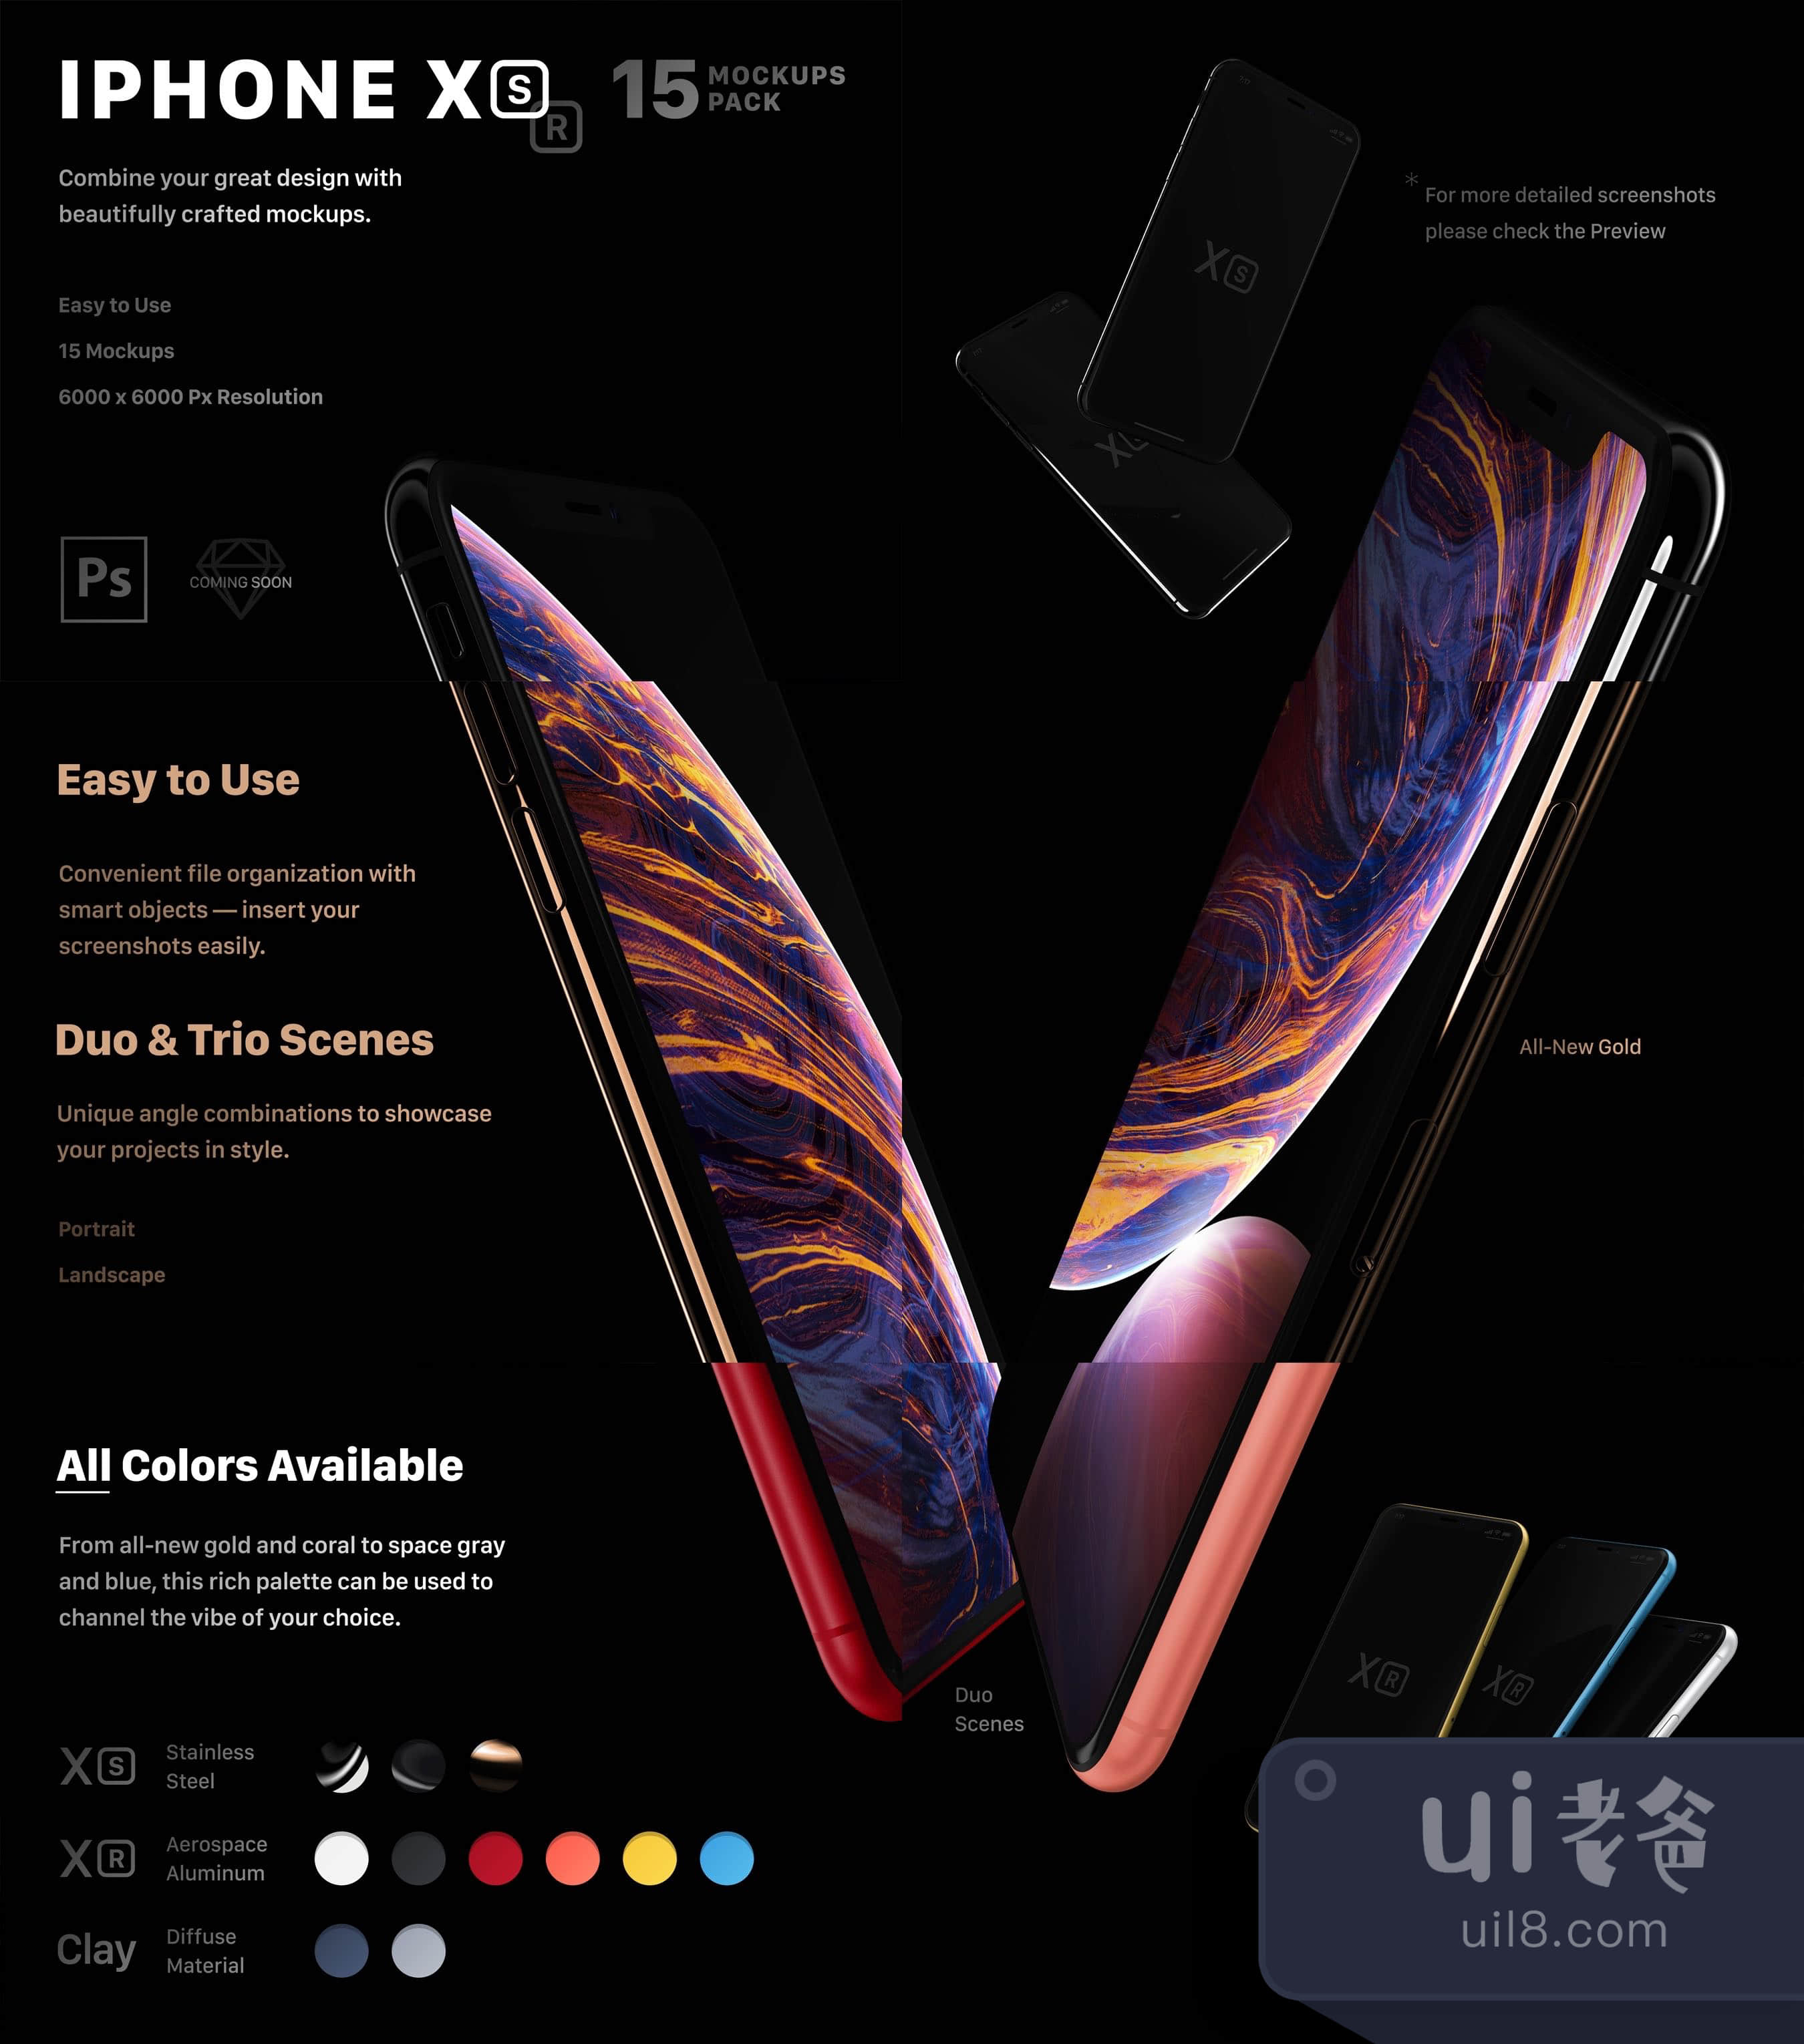 iPhone XS XR 15个模拟图 (iPhone XS XR 15 Mockups)插图1